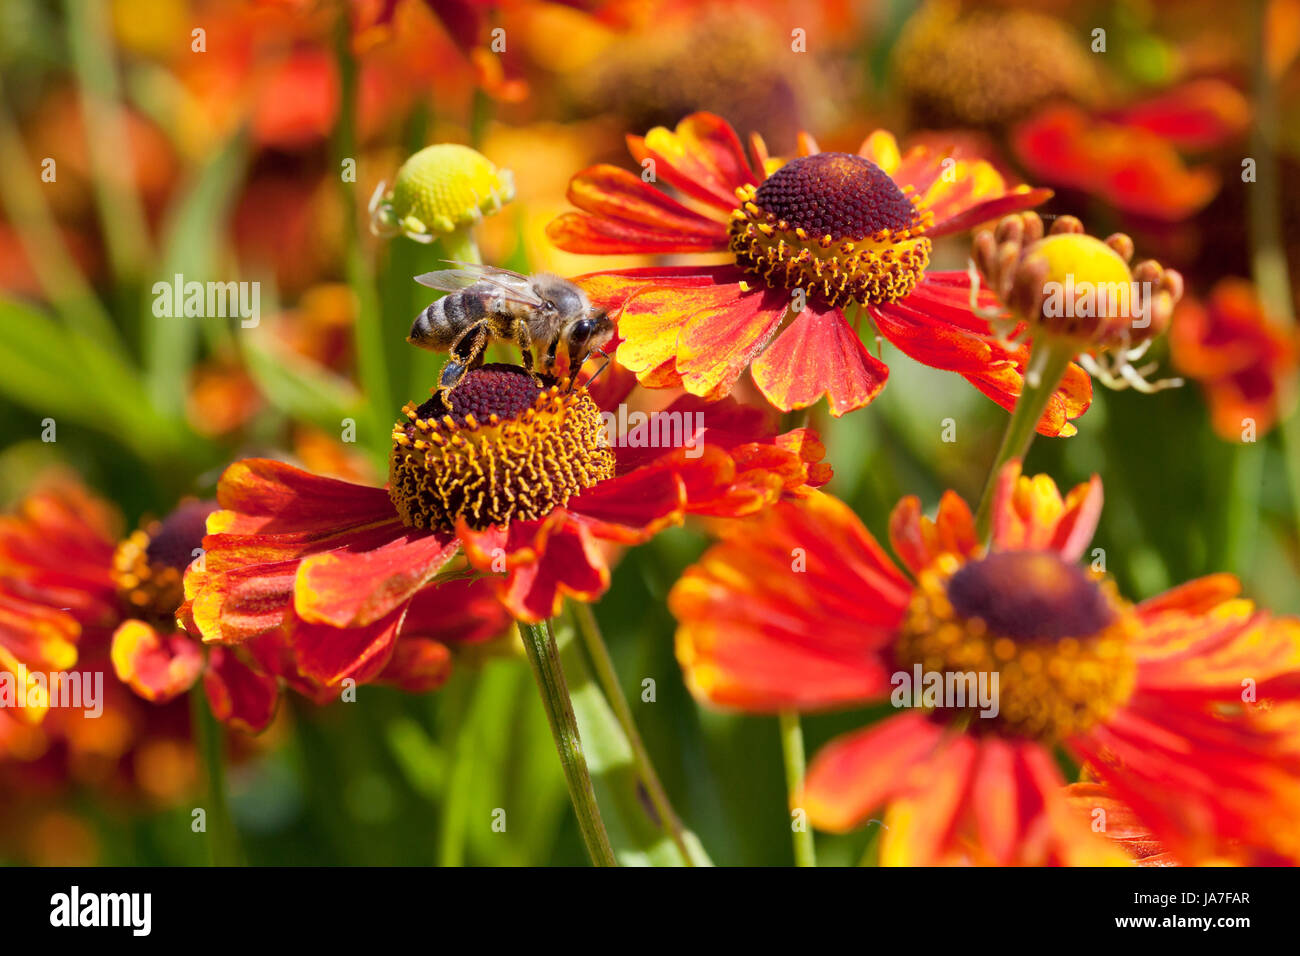 macro, close-up, macro admission, close up view, garden, insect, flower, plant, Stock Photo